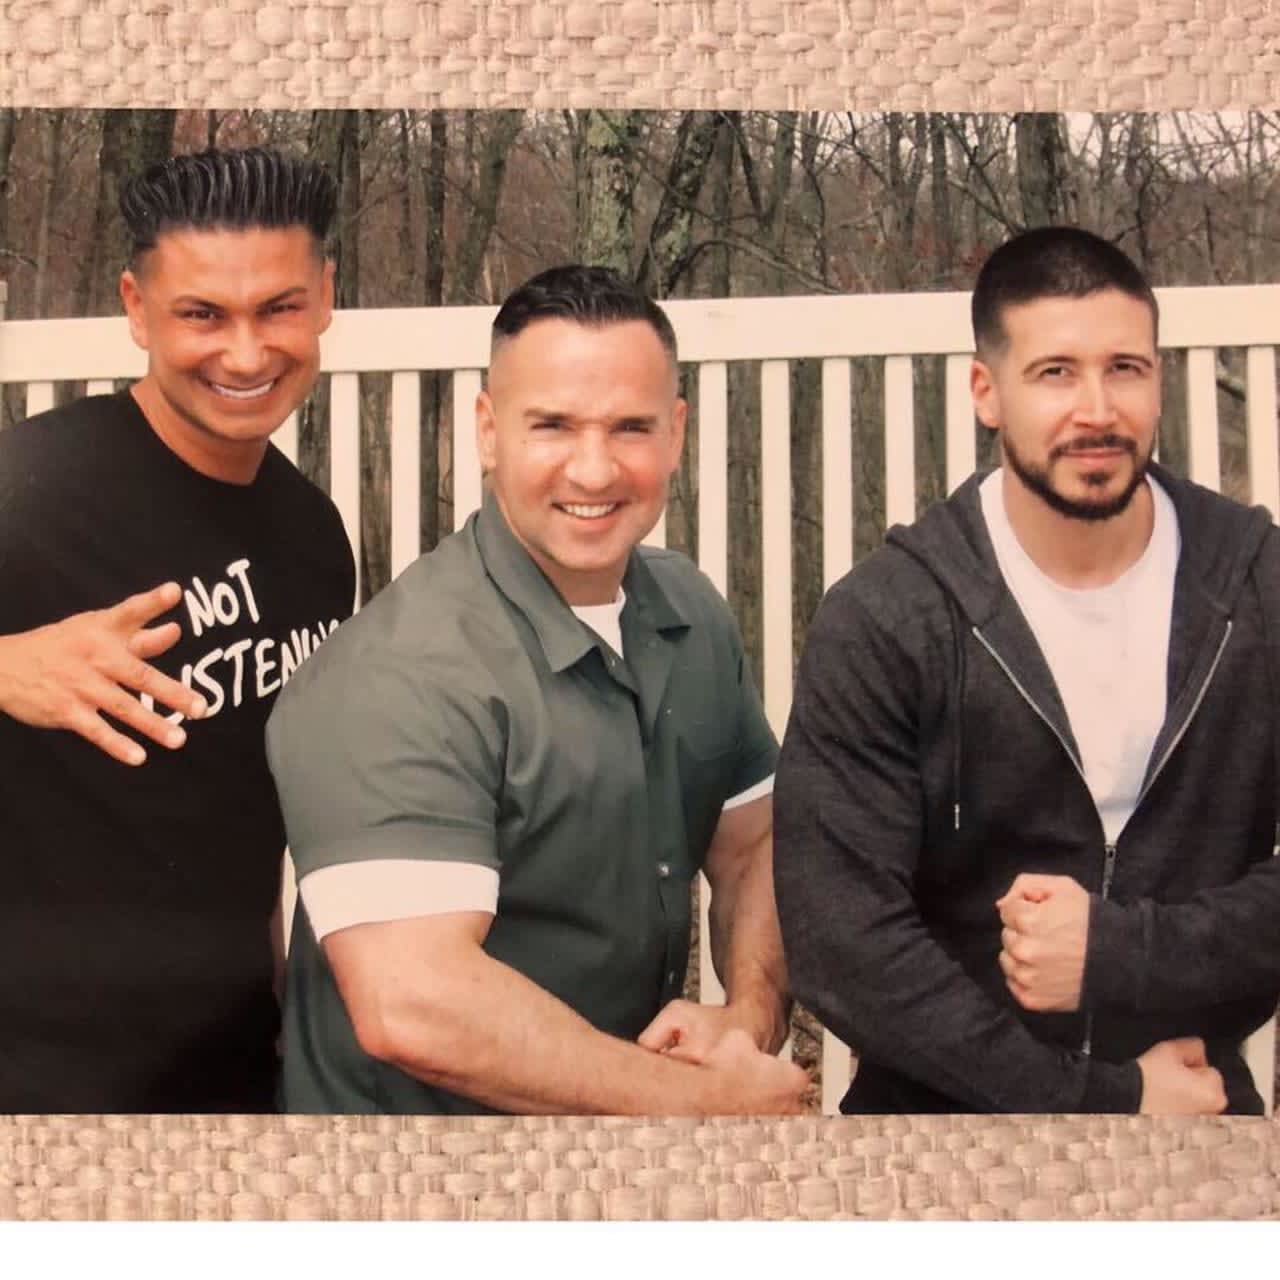 Mike Sorrentino, center, got a visit from "Jersey Shore" cast members Pauly DelVecchio and Vinny Guadagnino while in prison.